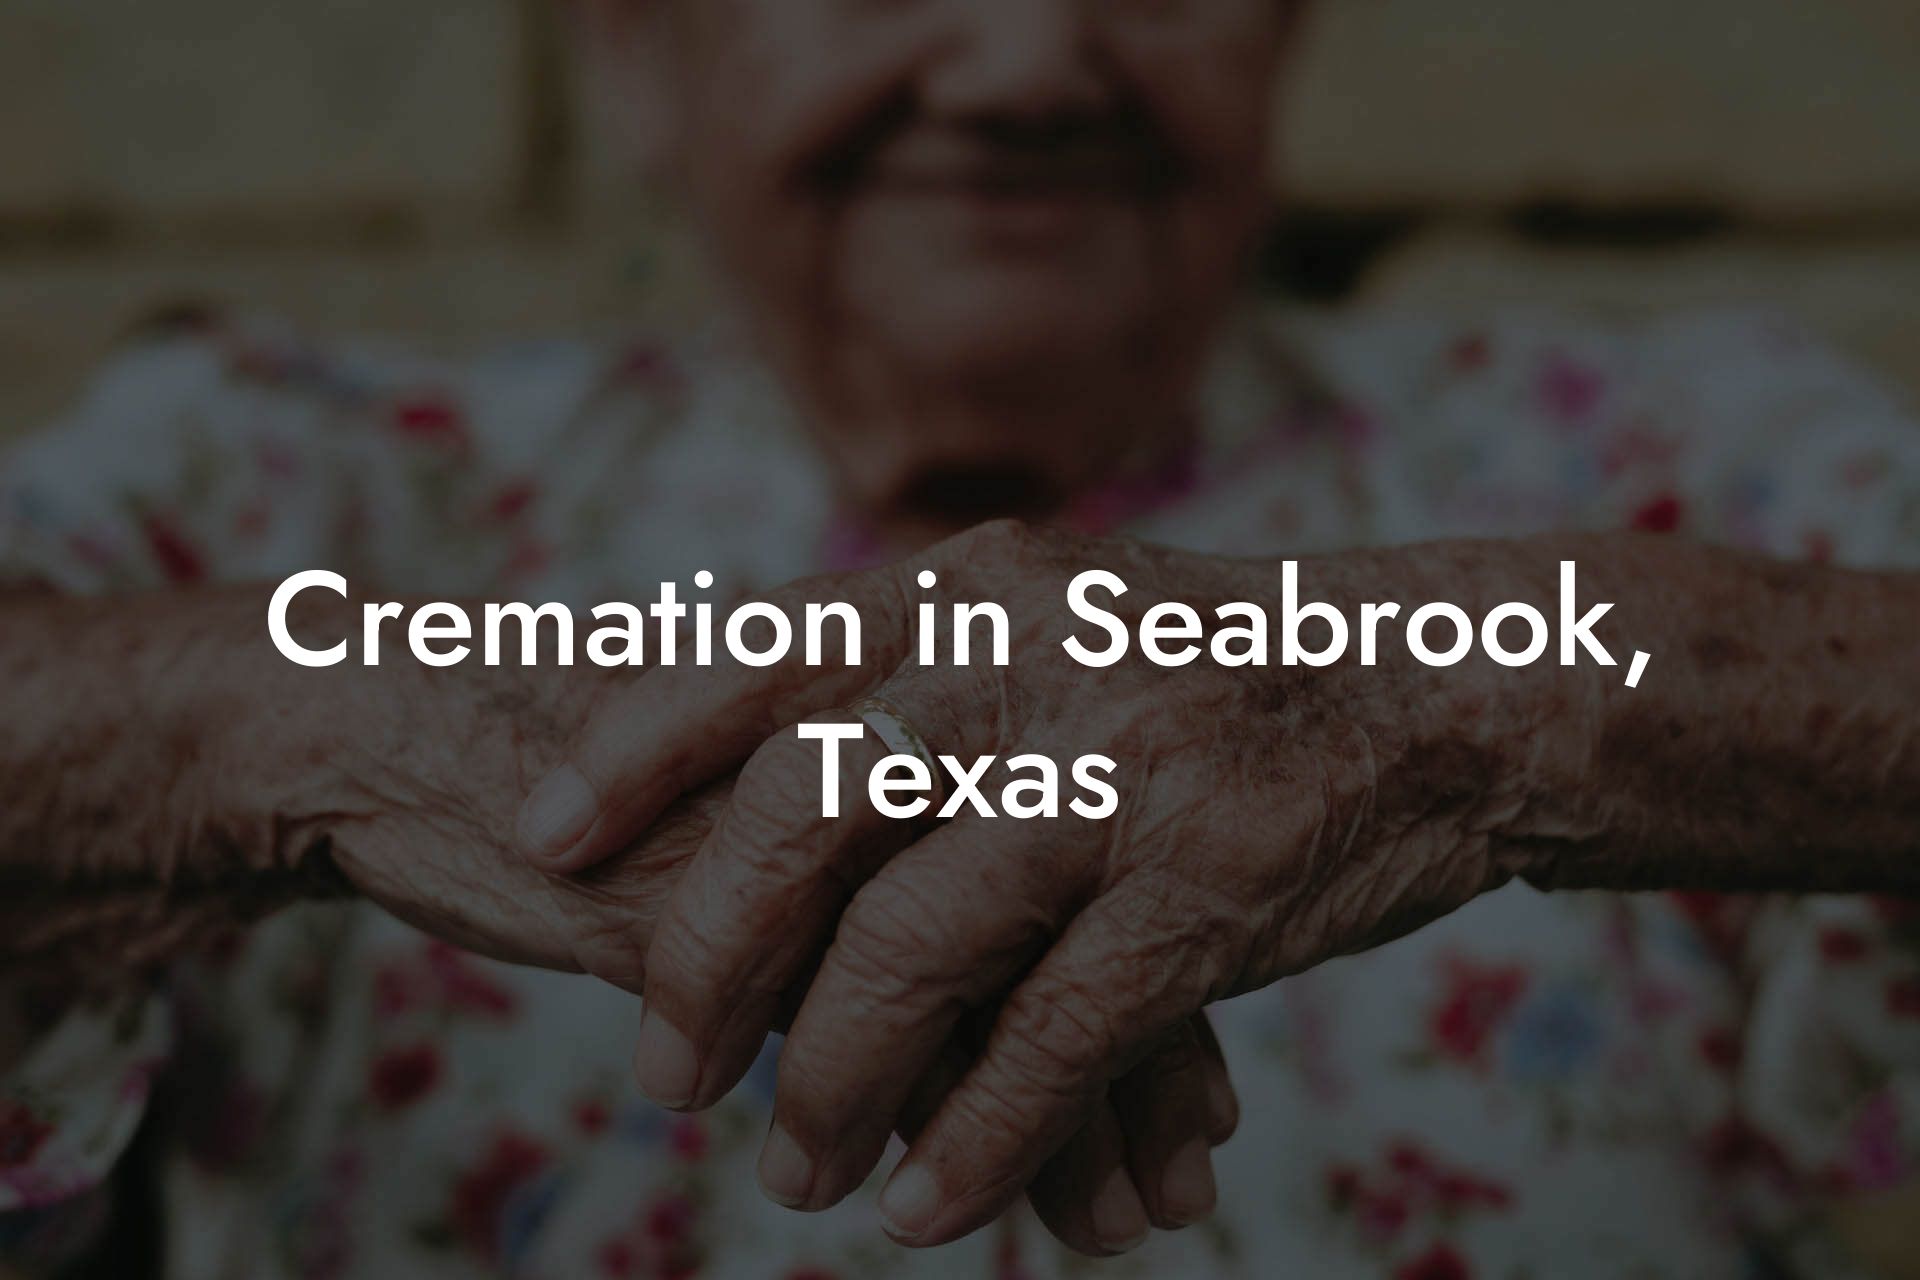 Cremation in Seabrook, Texas